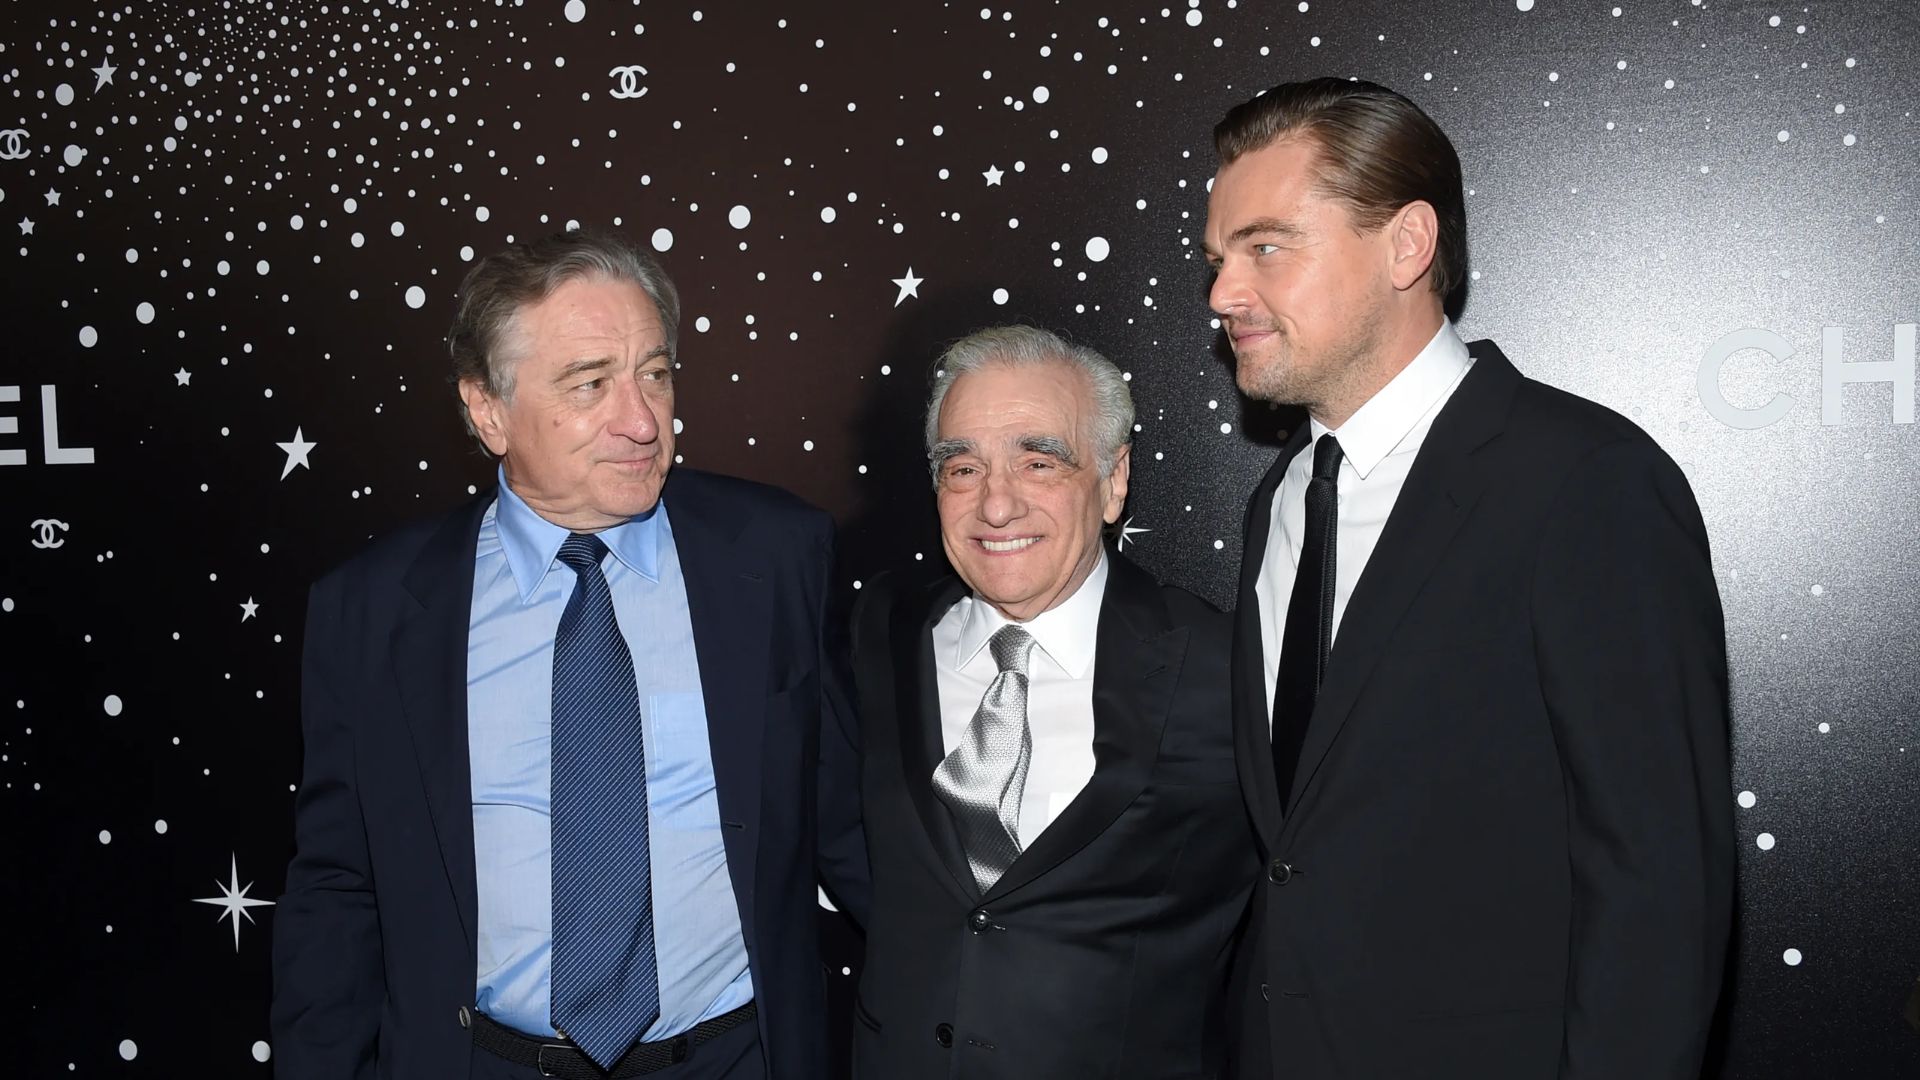 martin-scorsese-establishes-different-communication-styles-with-de-niro-and-dicaprio